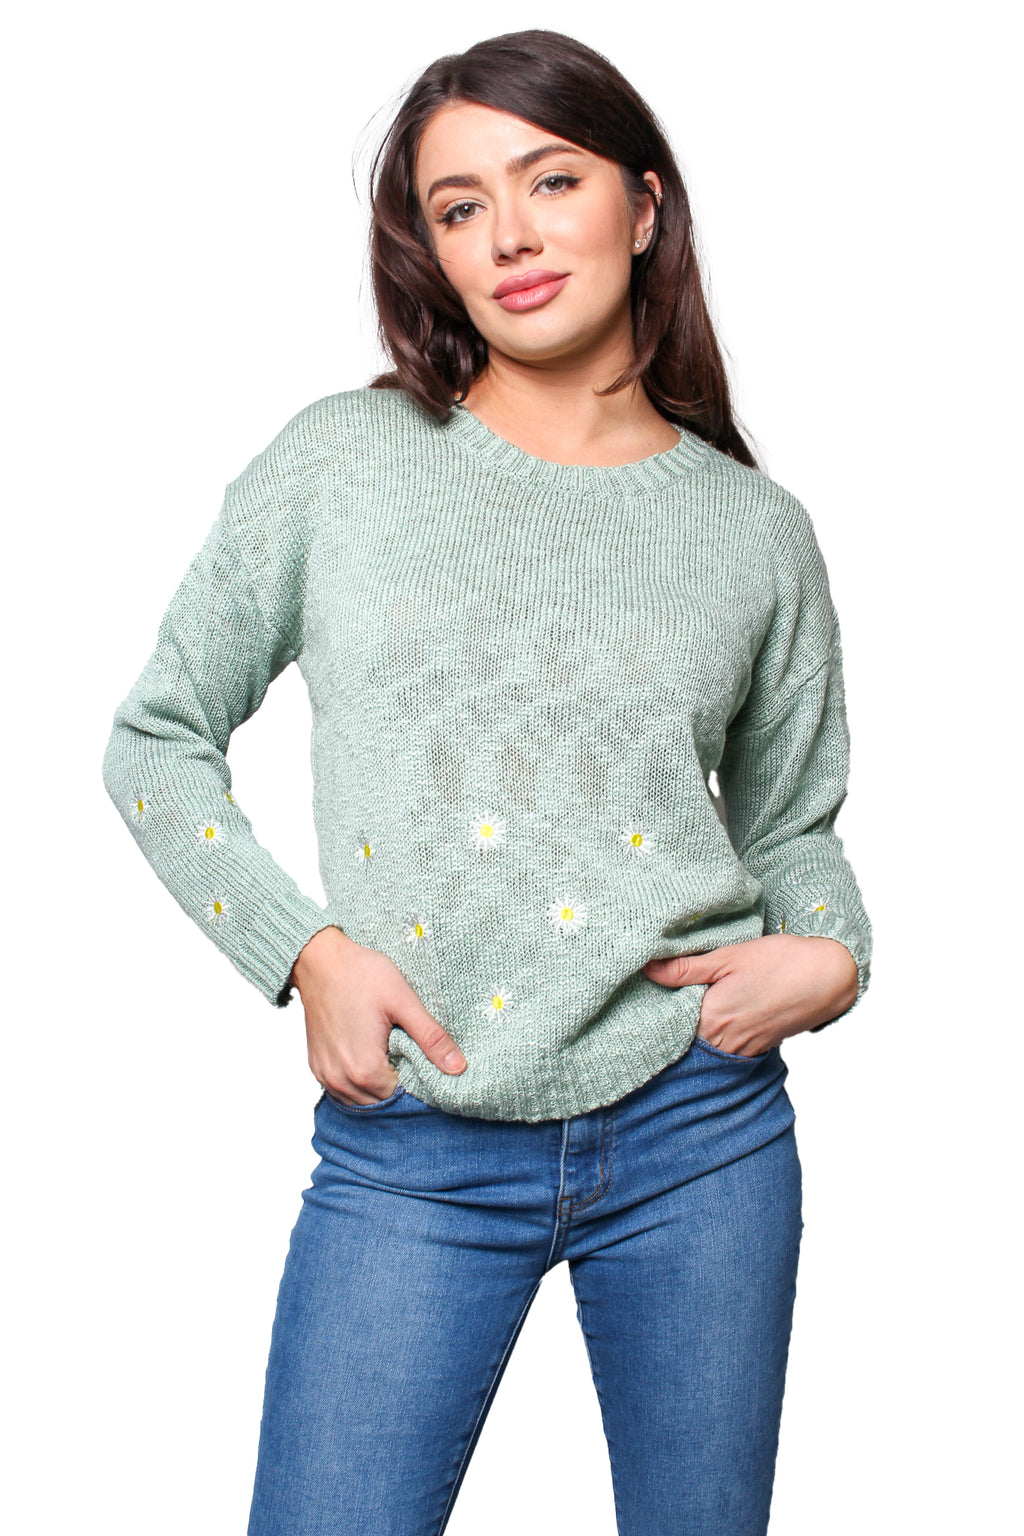 Women's Long Sleeves Crew Neck Daisy Print Knitted Top